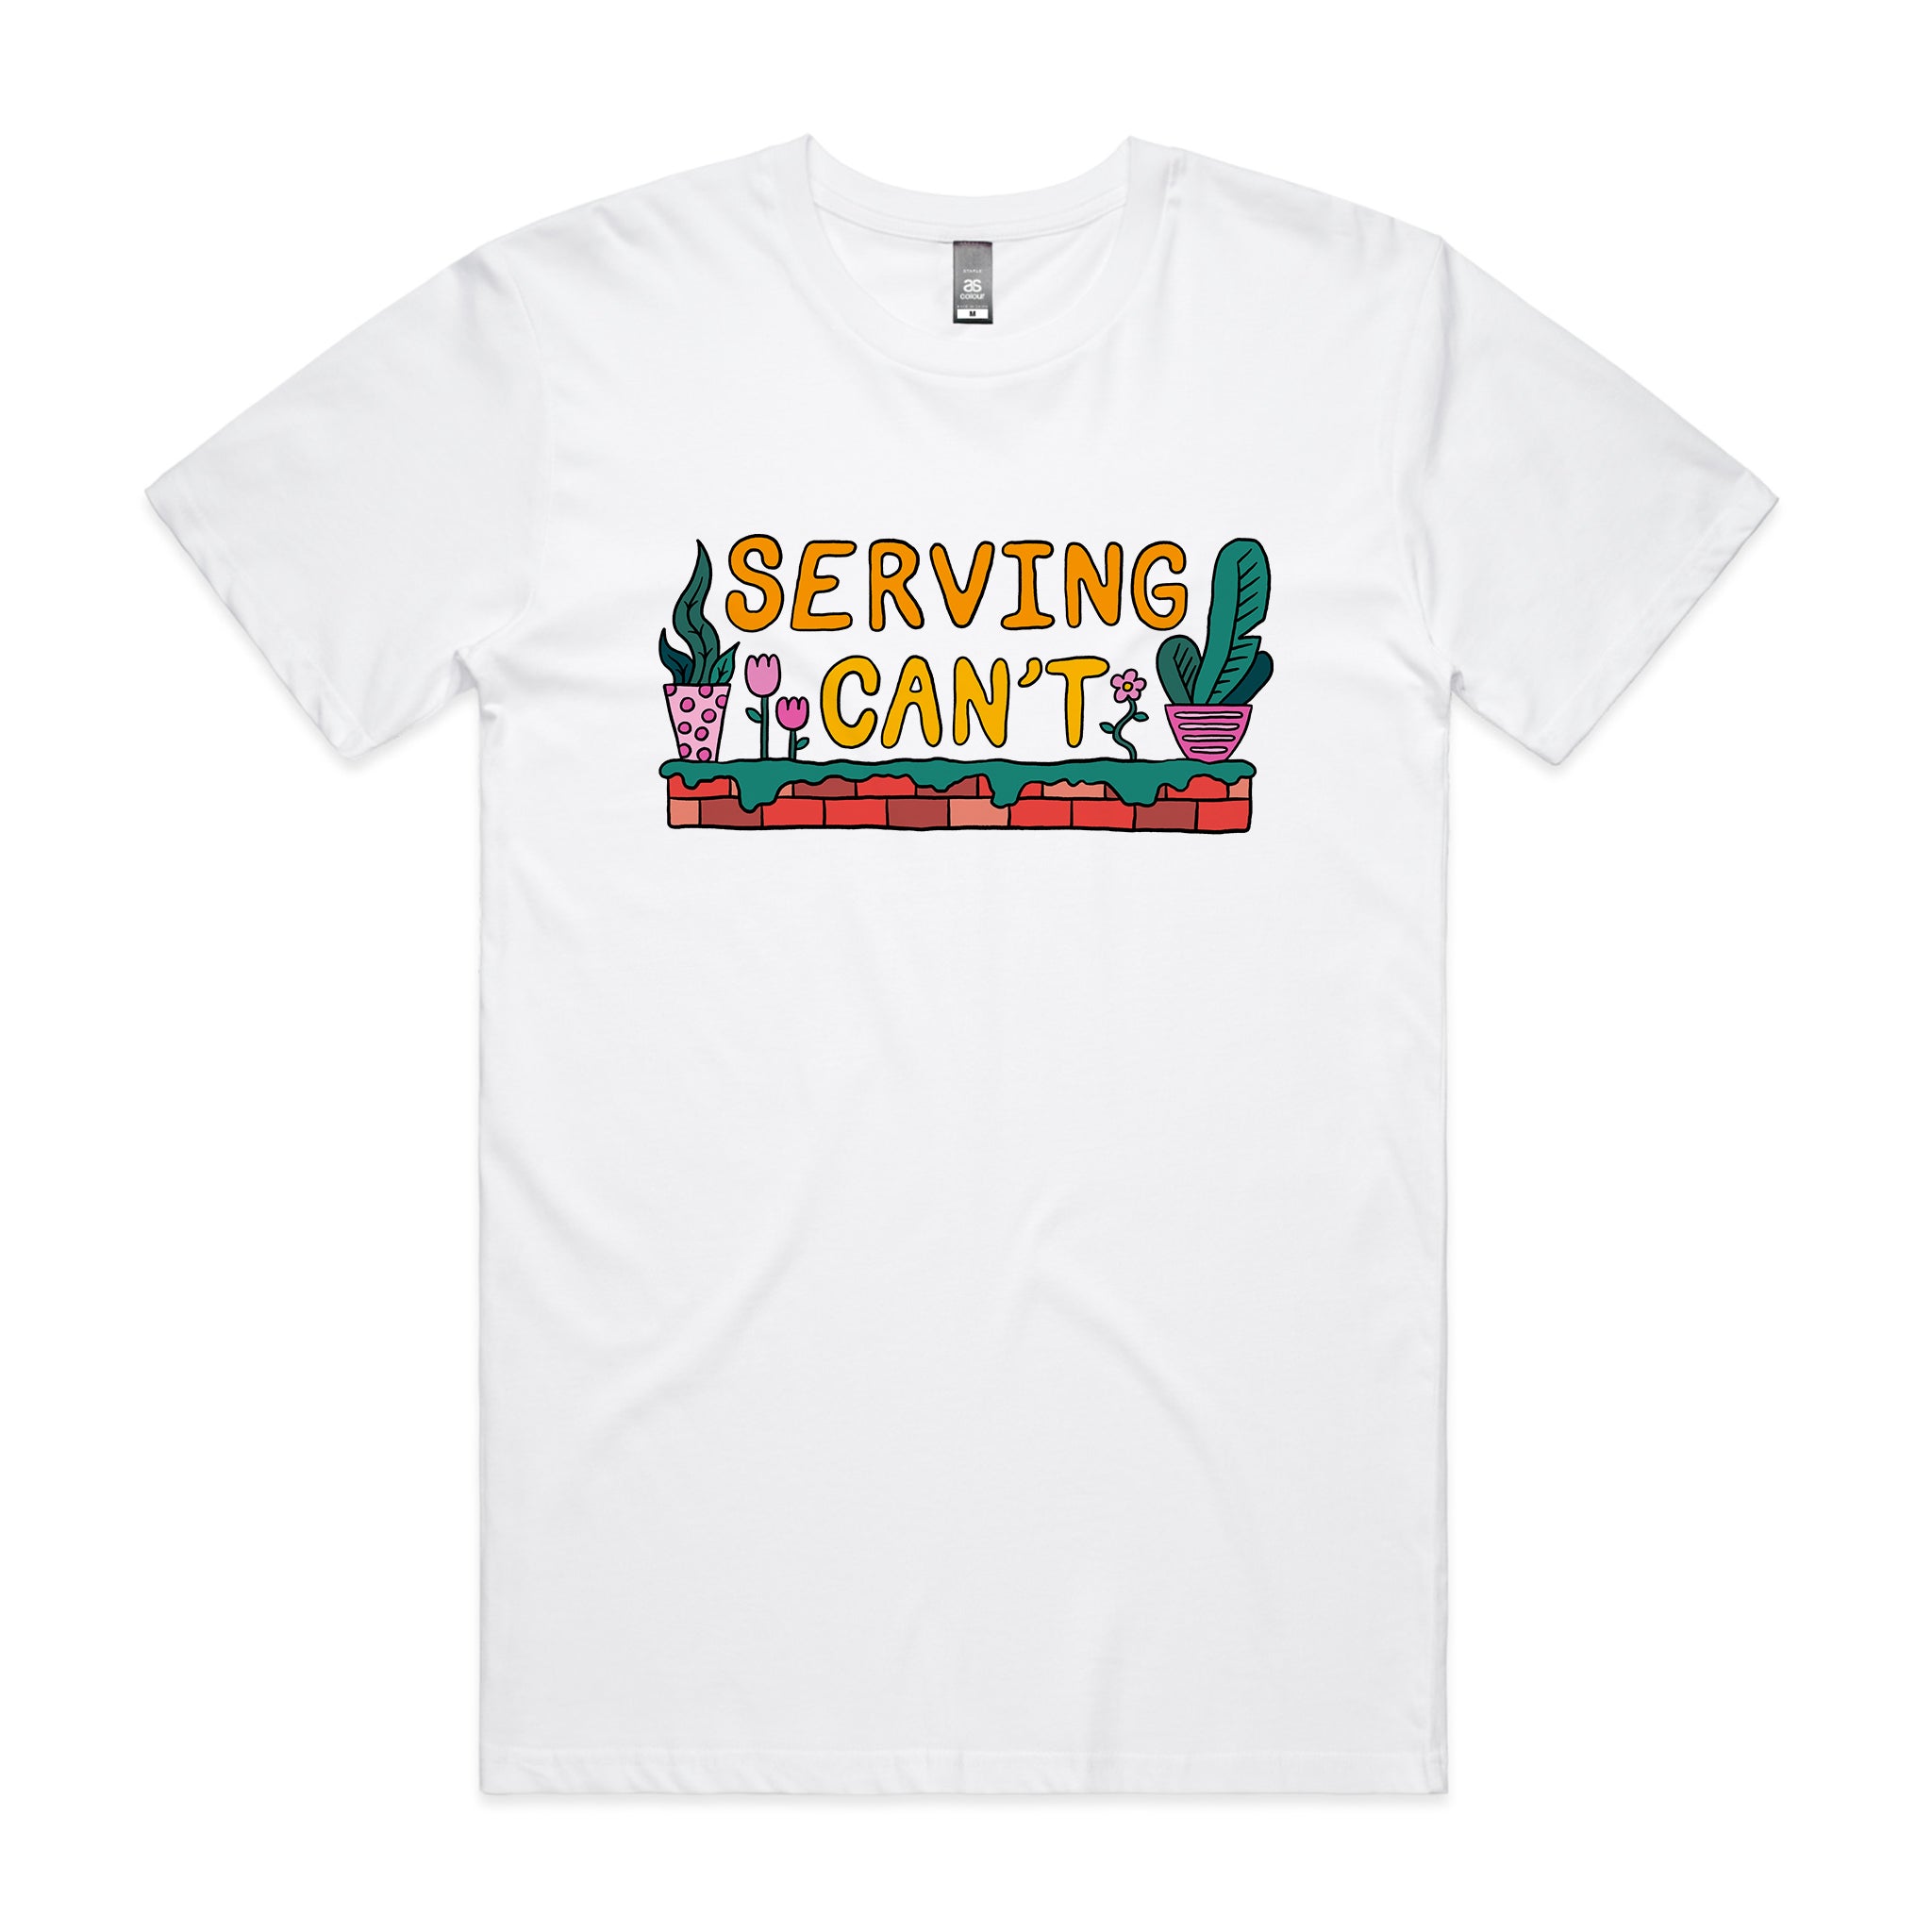 Serving Can't Tee